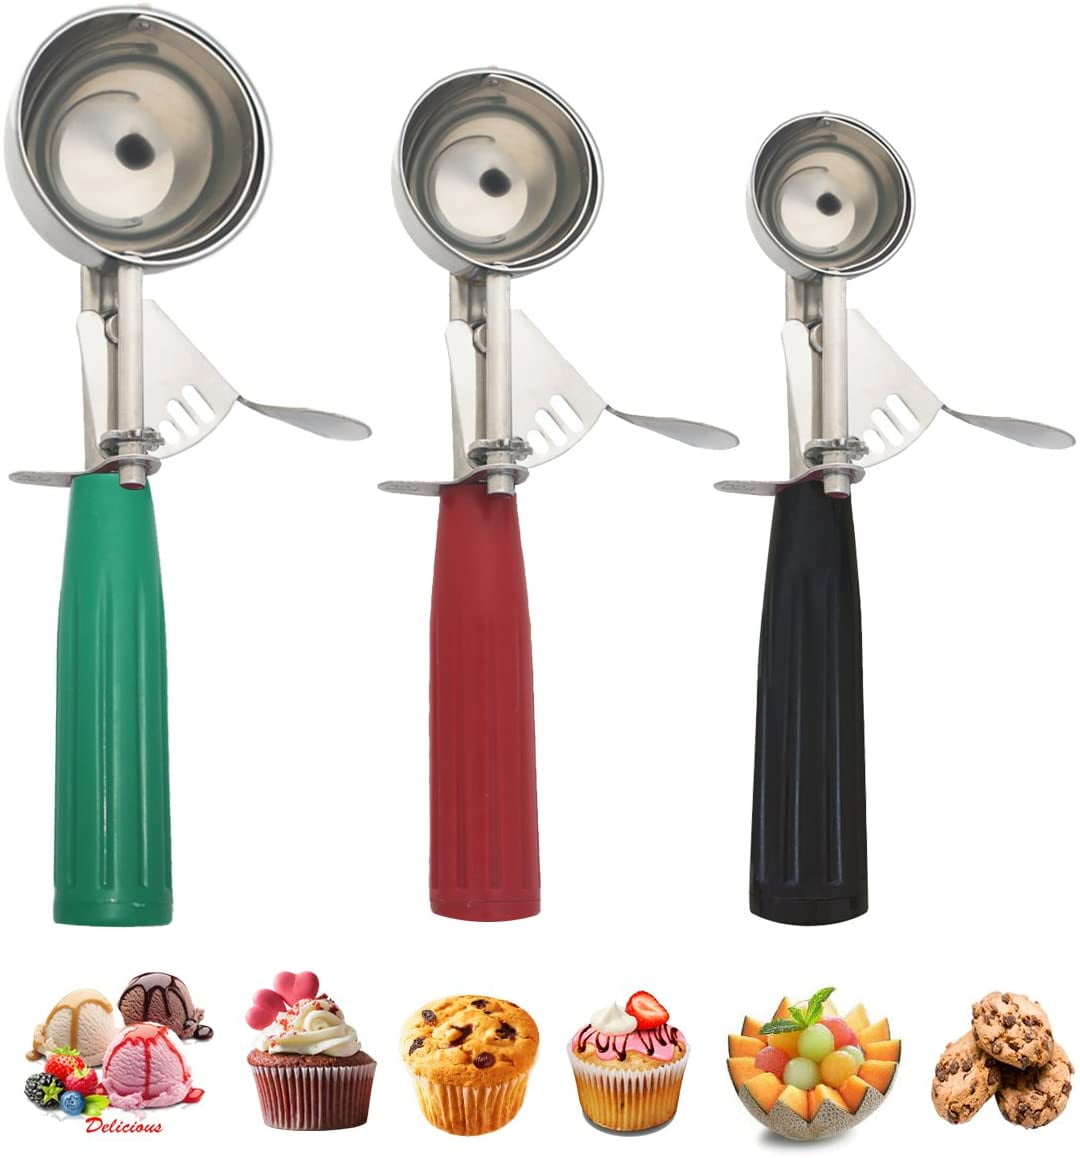 Professional 18/8 Stainless Steel Cupcake Scoop Cookie Scoop Set Ice Cream Scoop Set Multiple Size Large-Medium-Small Size Disher 